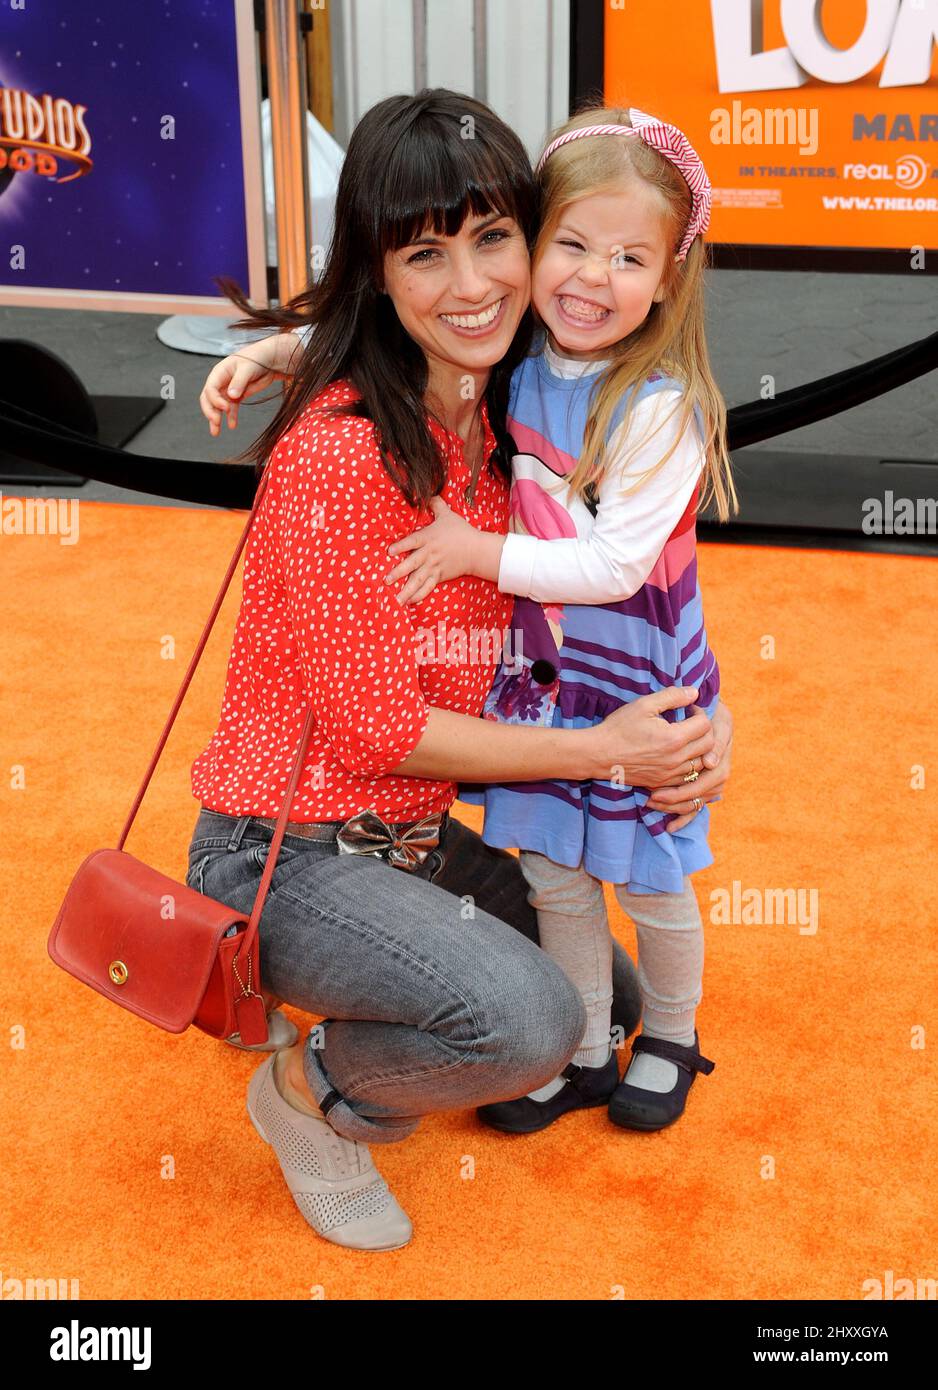 Constance Zimmer during the premiere of the new movie from Universal Pictures THE LORAX, held at Universal Studios City Walk in Los Angeles. Stock Photo